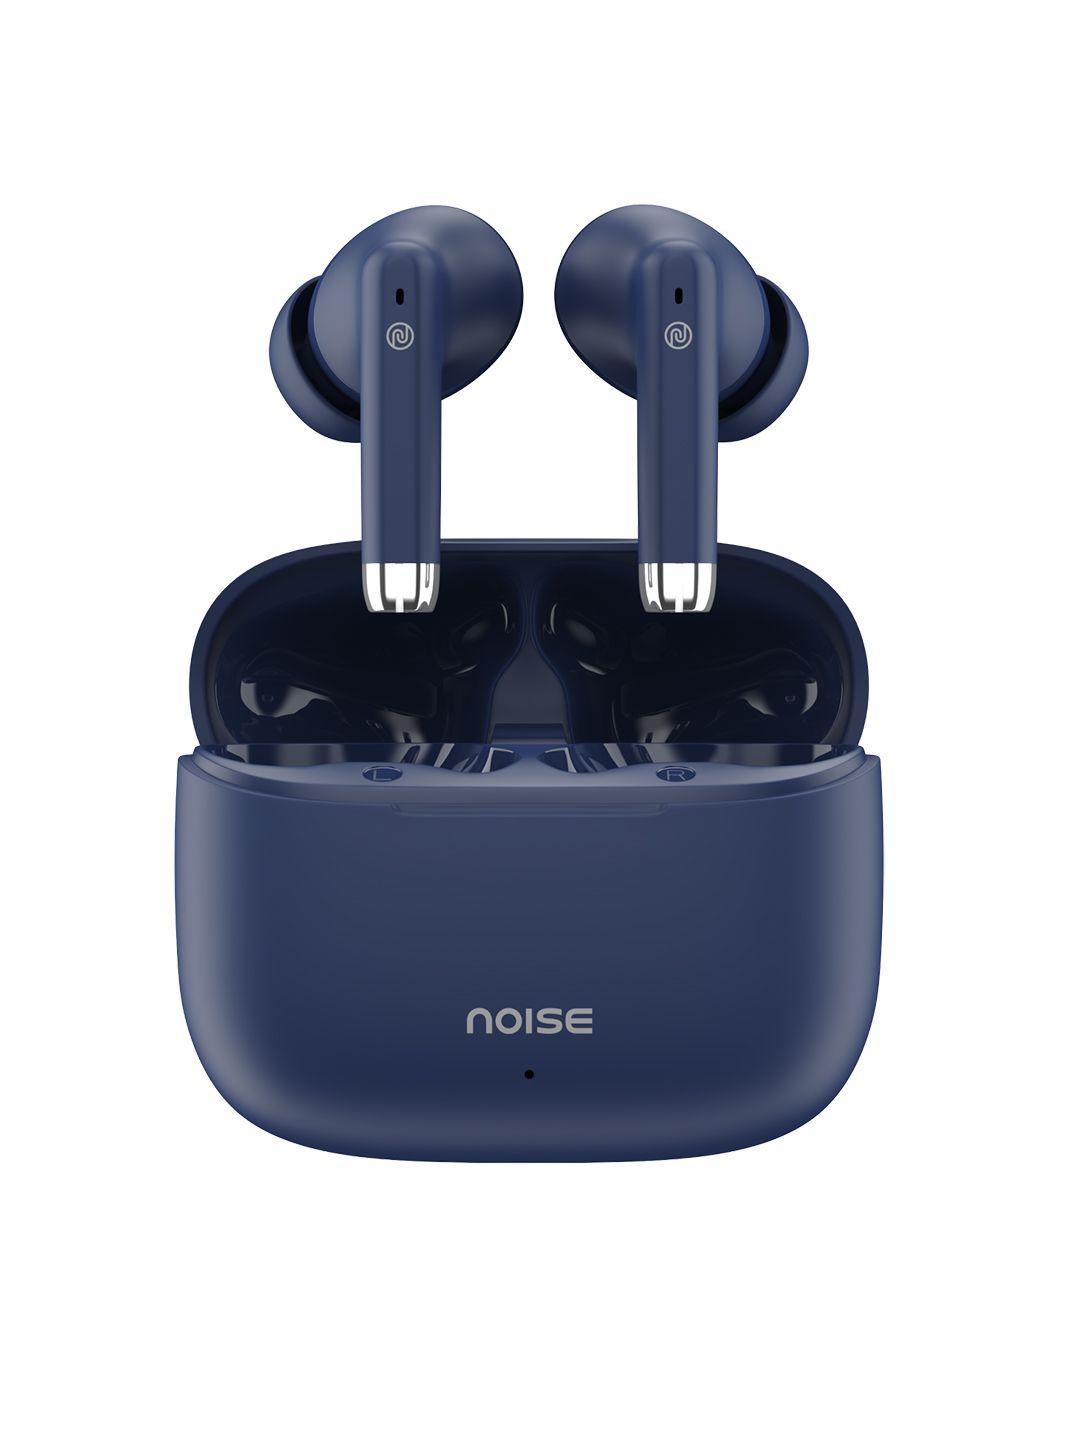 noise-buds-aero-truly-wireless-earbuds-with-45hrs-playtime-and-13mm-driver---midnight-blue